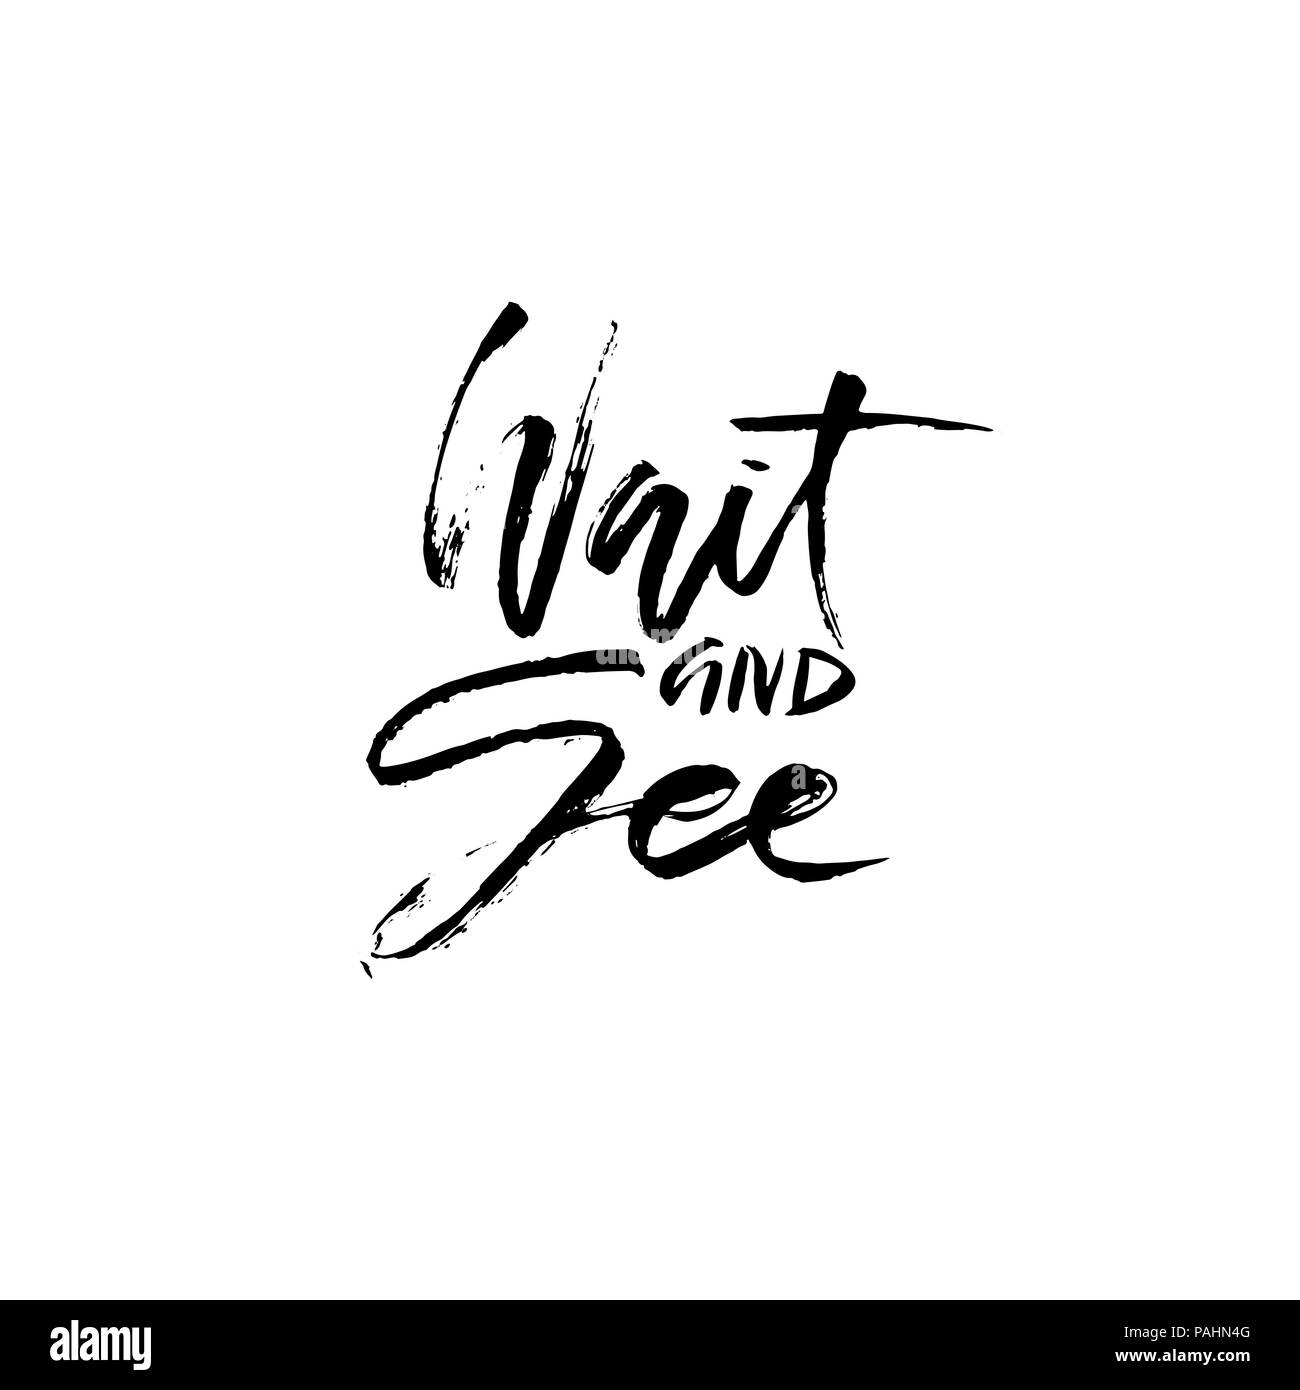 Wait and see. Hand drawn dry brush lettering. Ink illustration. Modern calligraphy phrase. Vector illustration. Stock Vector